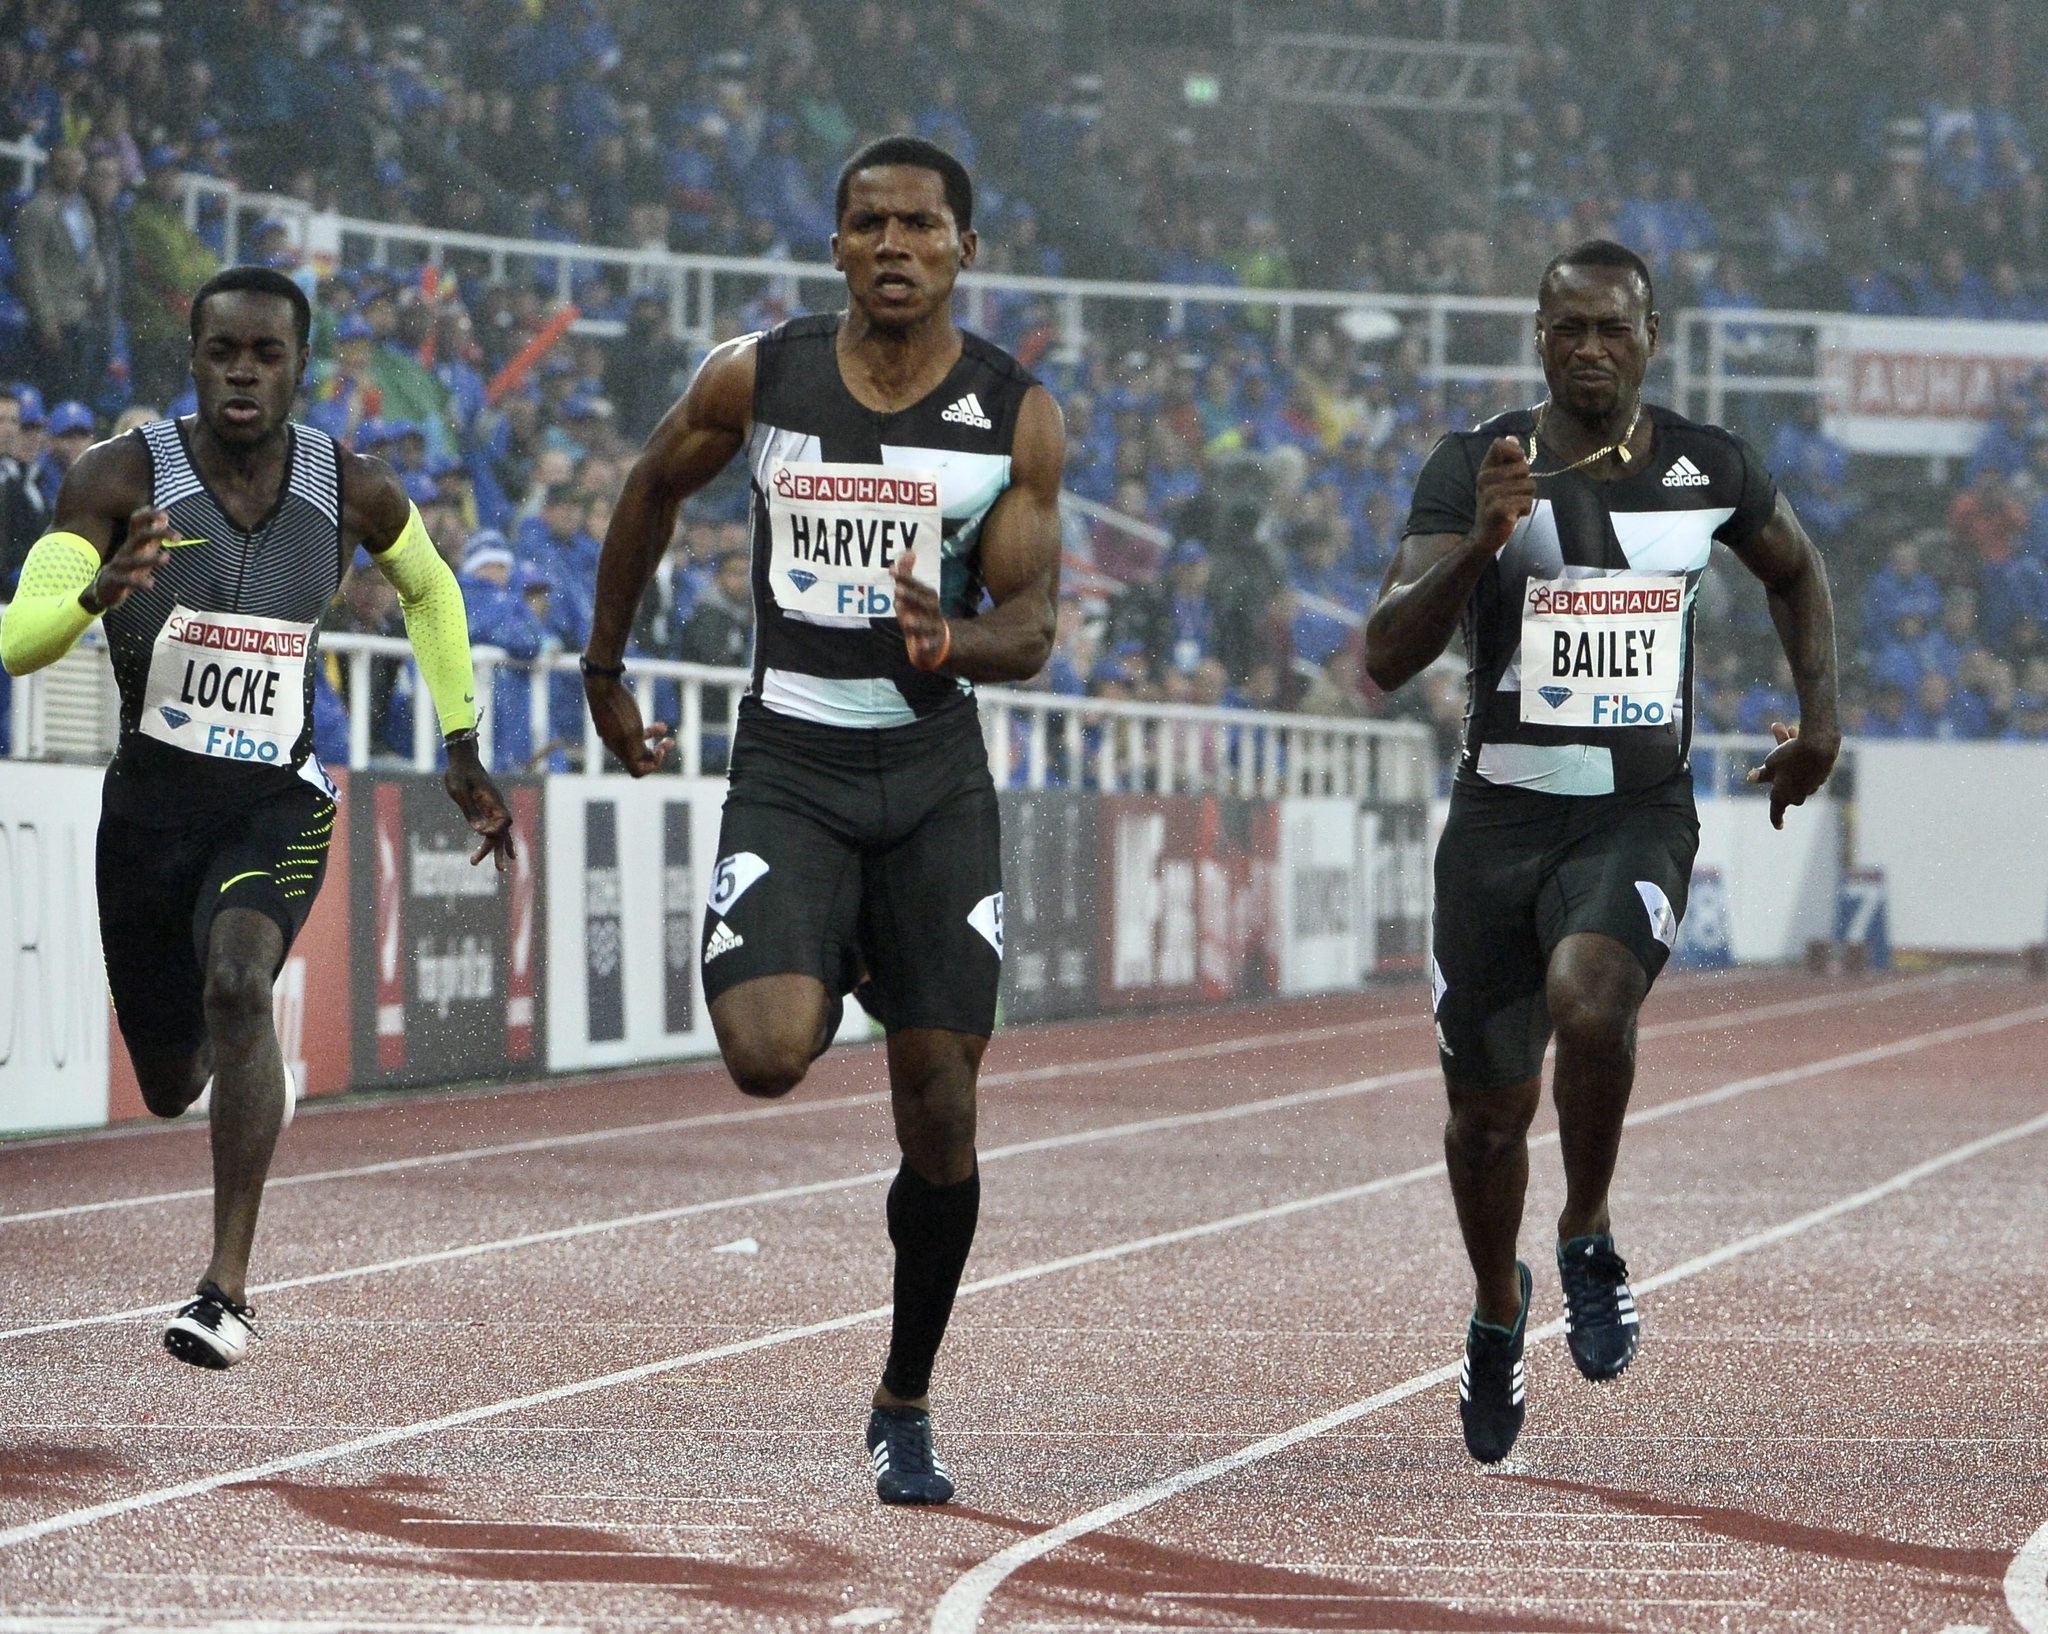  Dentarius Locke of the US (L-R), Jak Ali Harvey of Turkey and Daniel Bailey of Antigua compete in the men's 100m during the Bauhaus Gala, part of the 2016 IAAF Diamond League athletics meeting in Stockholm, 16 June 2016. (EPA Photo)